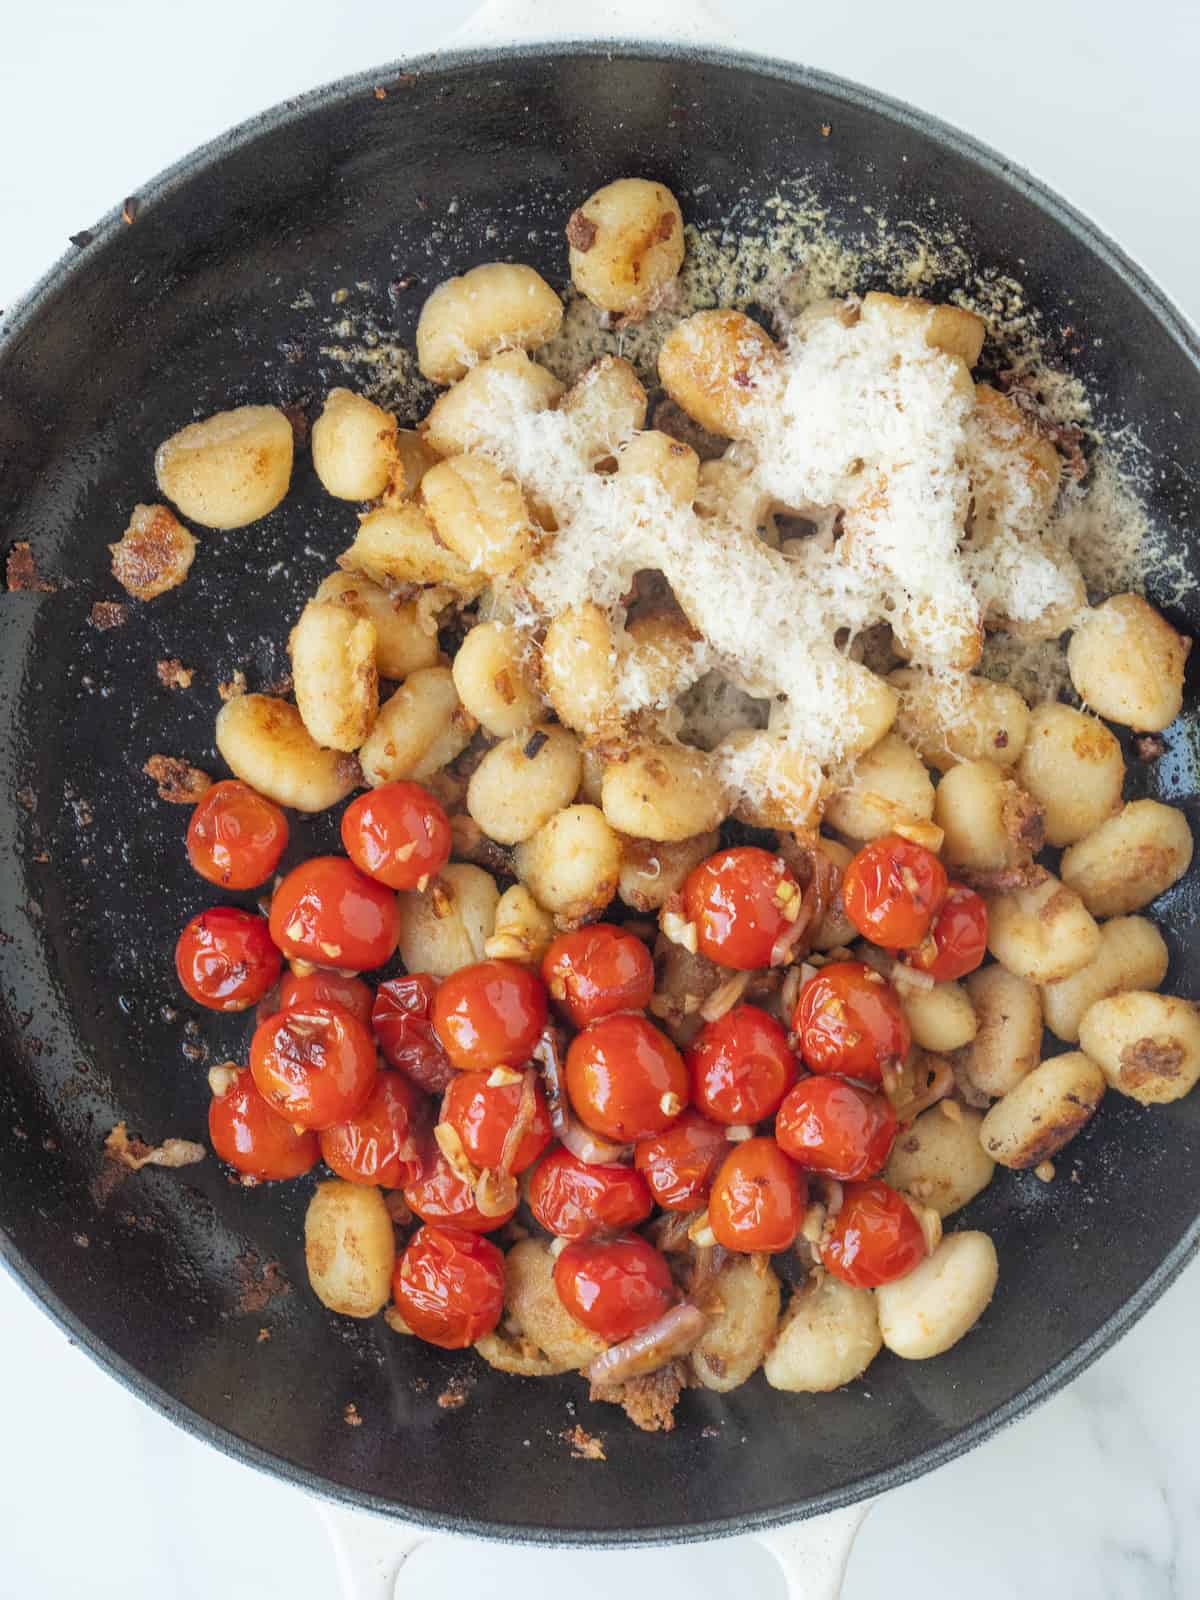 A skillet with gnocchi thats been crisped, along with the blistered cherry tomato mixture and grated parmesan added.